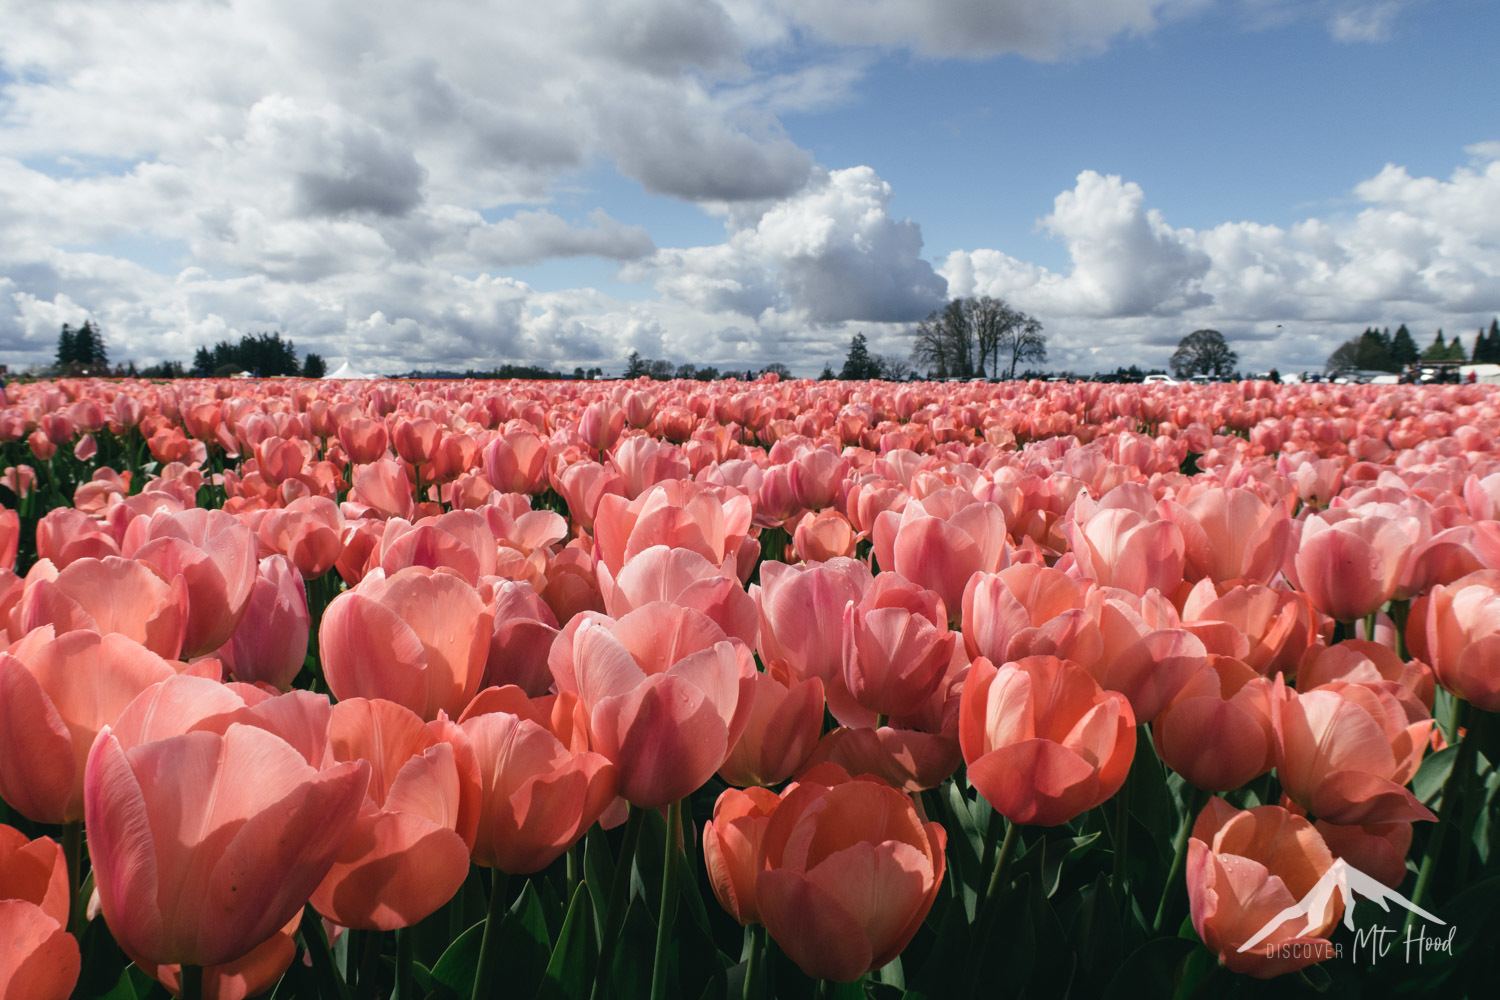 Rows of pink tulips in front of blue sky